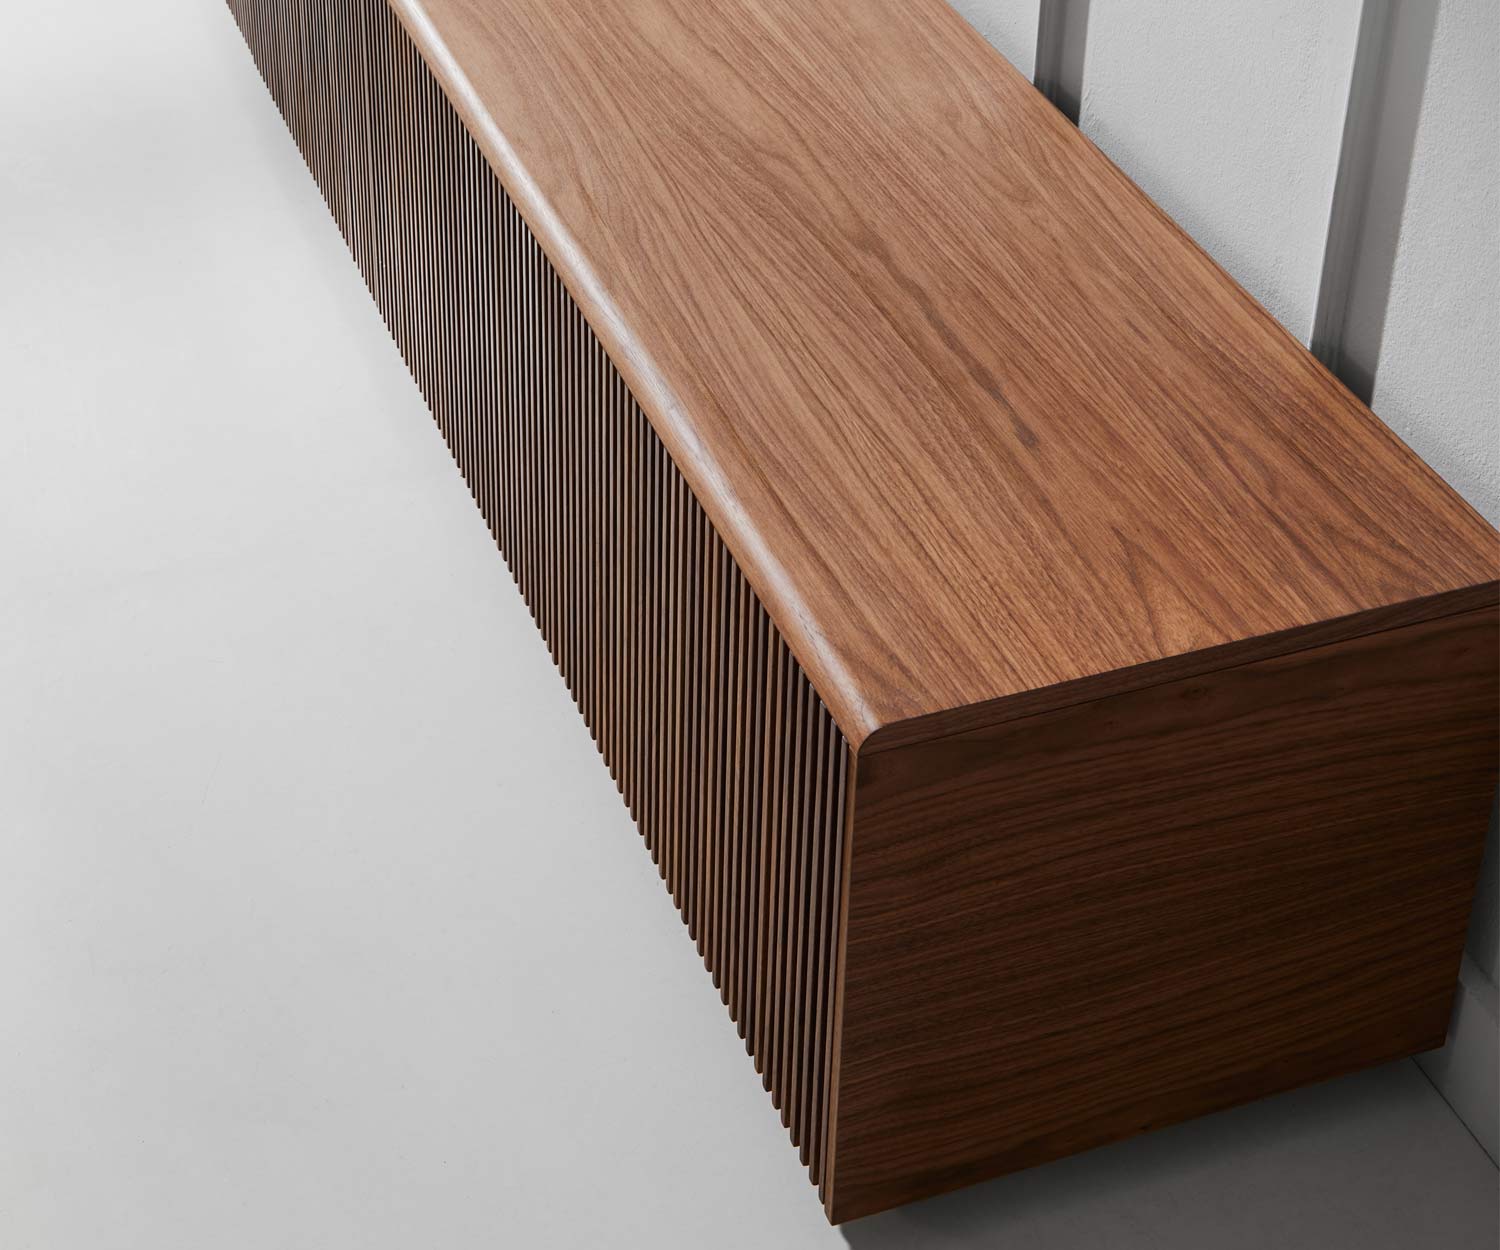 Design TV design lowboard Detail edges of real wood veneer carcass finished with walnut